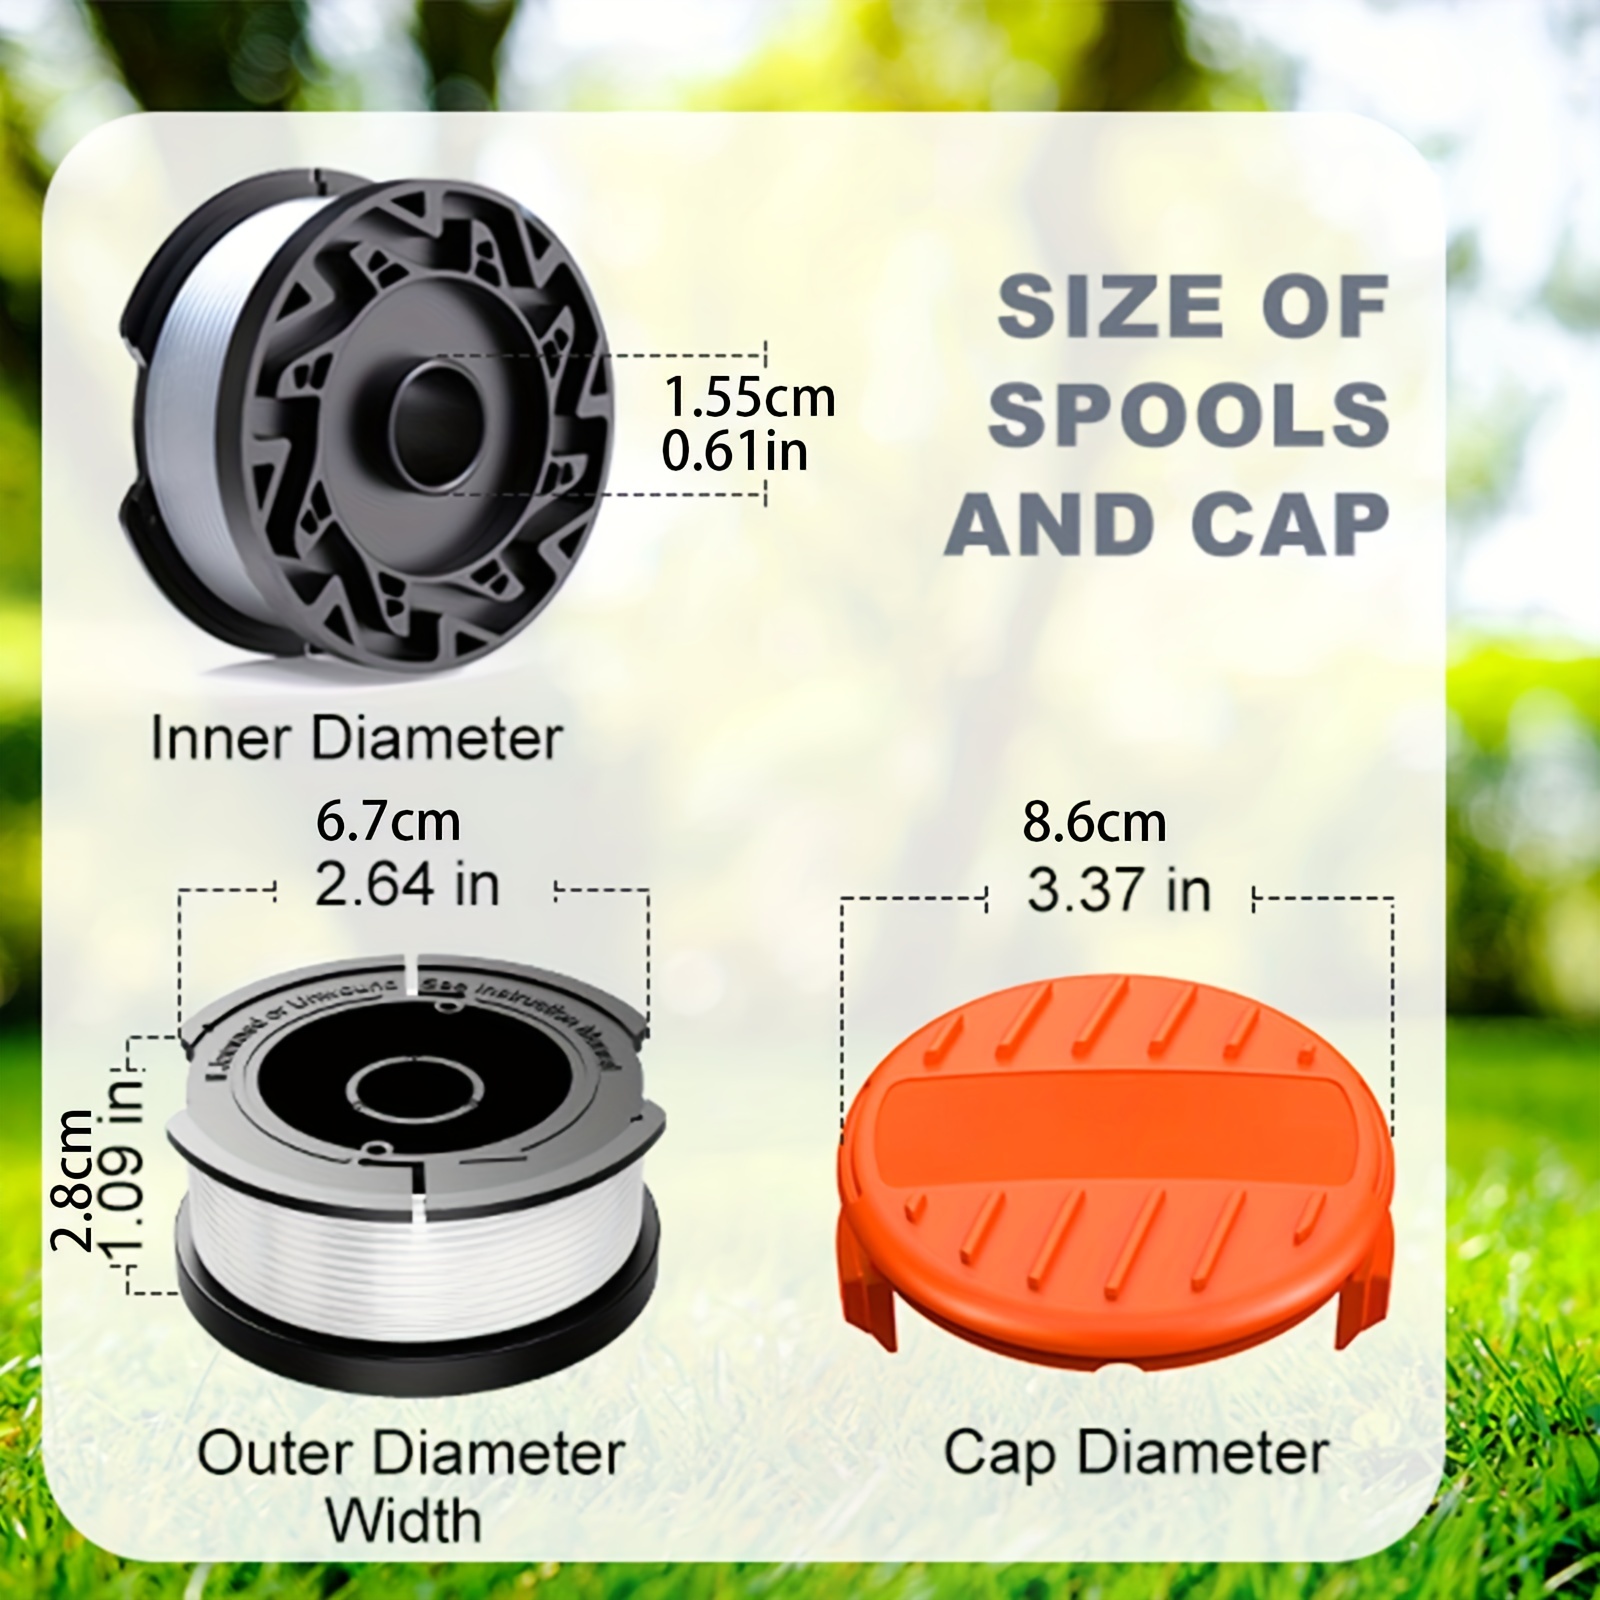 THTEN AF-100 String Trimmer Spool Replacement for Black and Decker 30ft  0.065 Refills Line Auto Feed Single Weed Eater,GH600 GH900 Edger with  RC-100-P Spool Cap Covers (6 Spools, 1 Cap,1 Spring) 